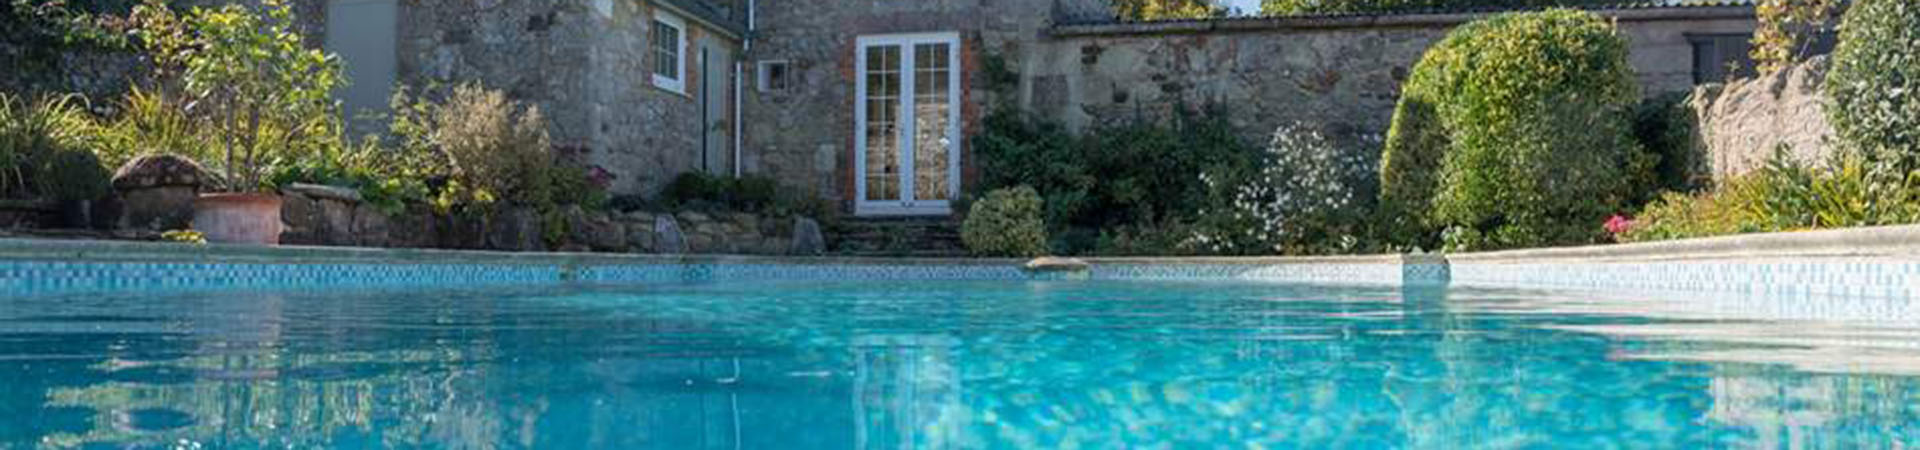 Holiday cottages with pools in Conwy